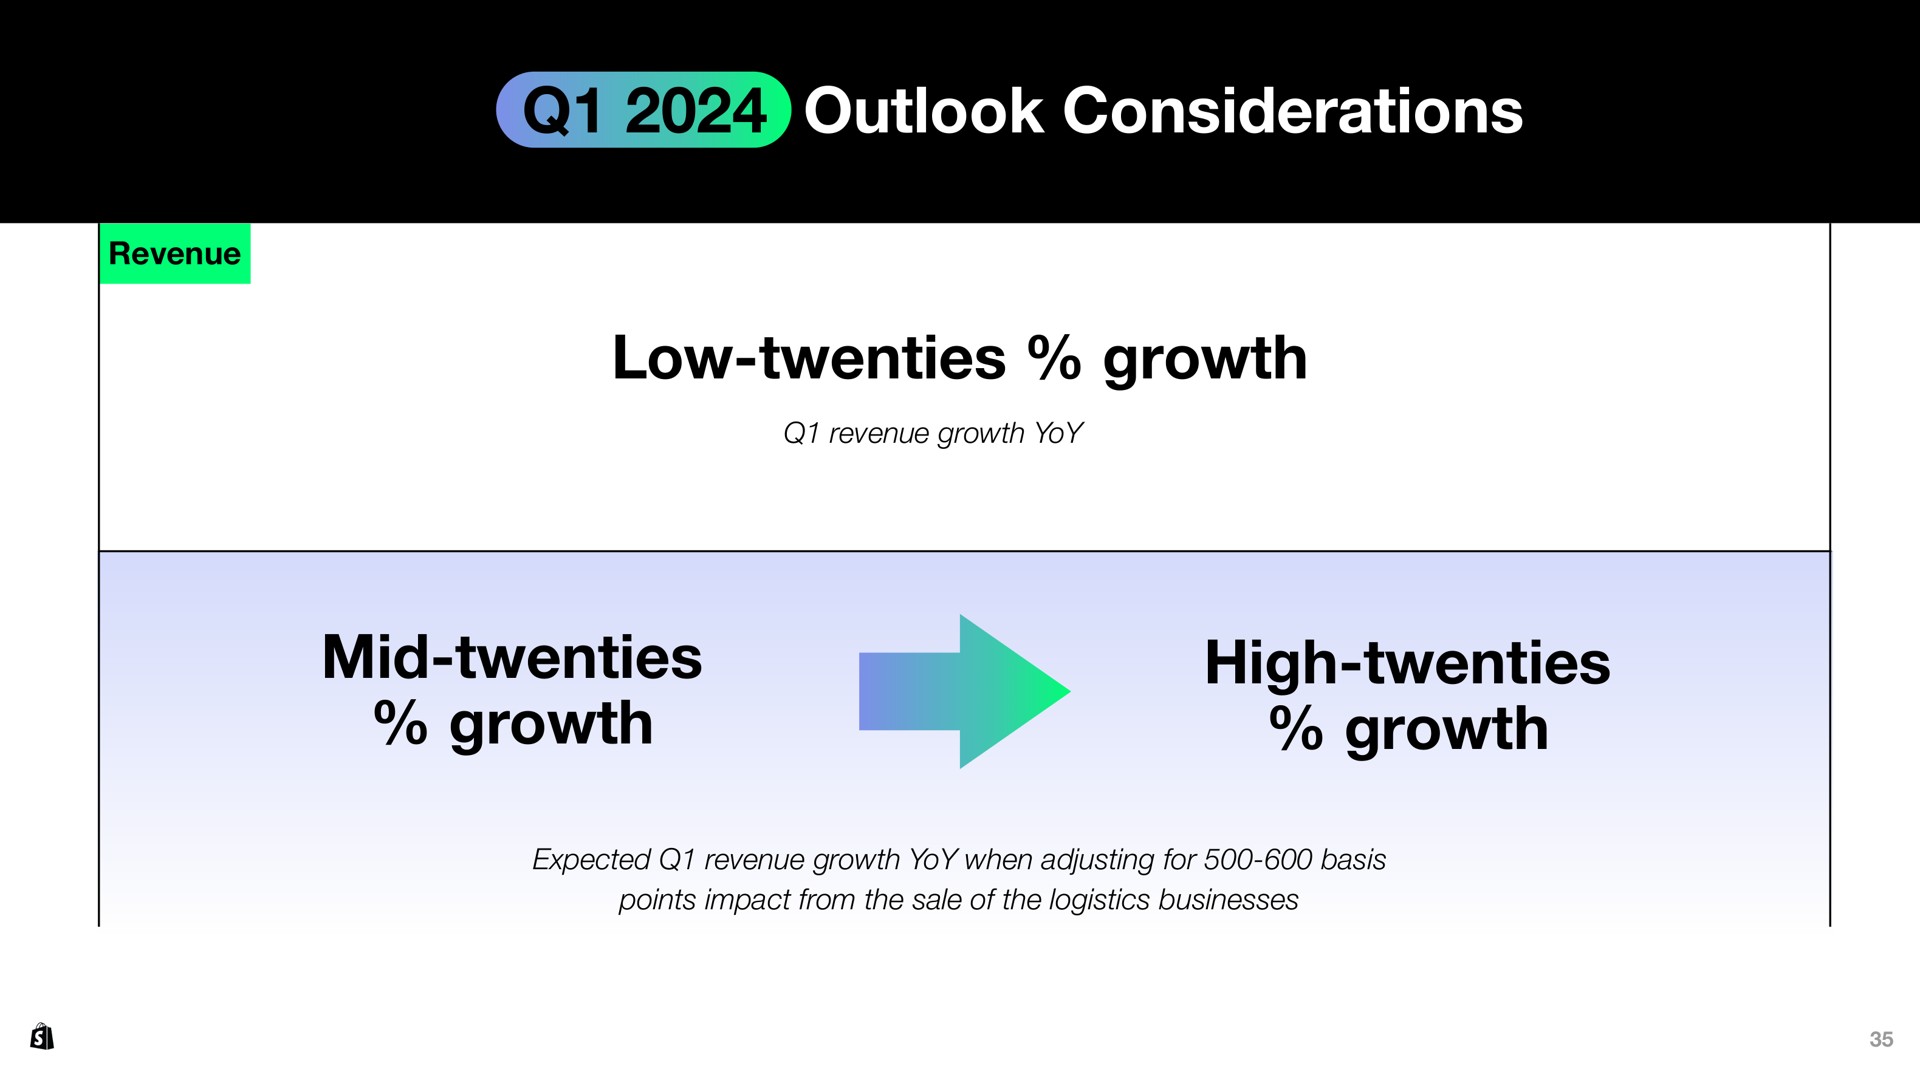 outlook considerations low twenties growth mid twenties growth high twenties growth to | Shopify